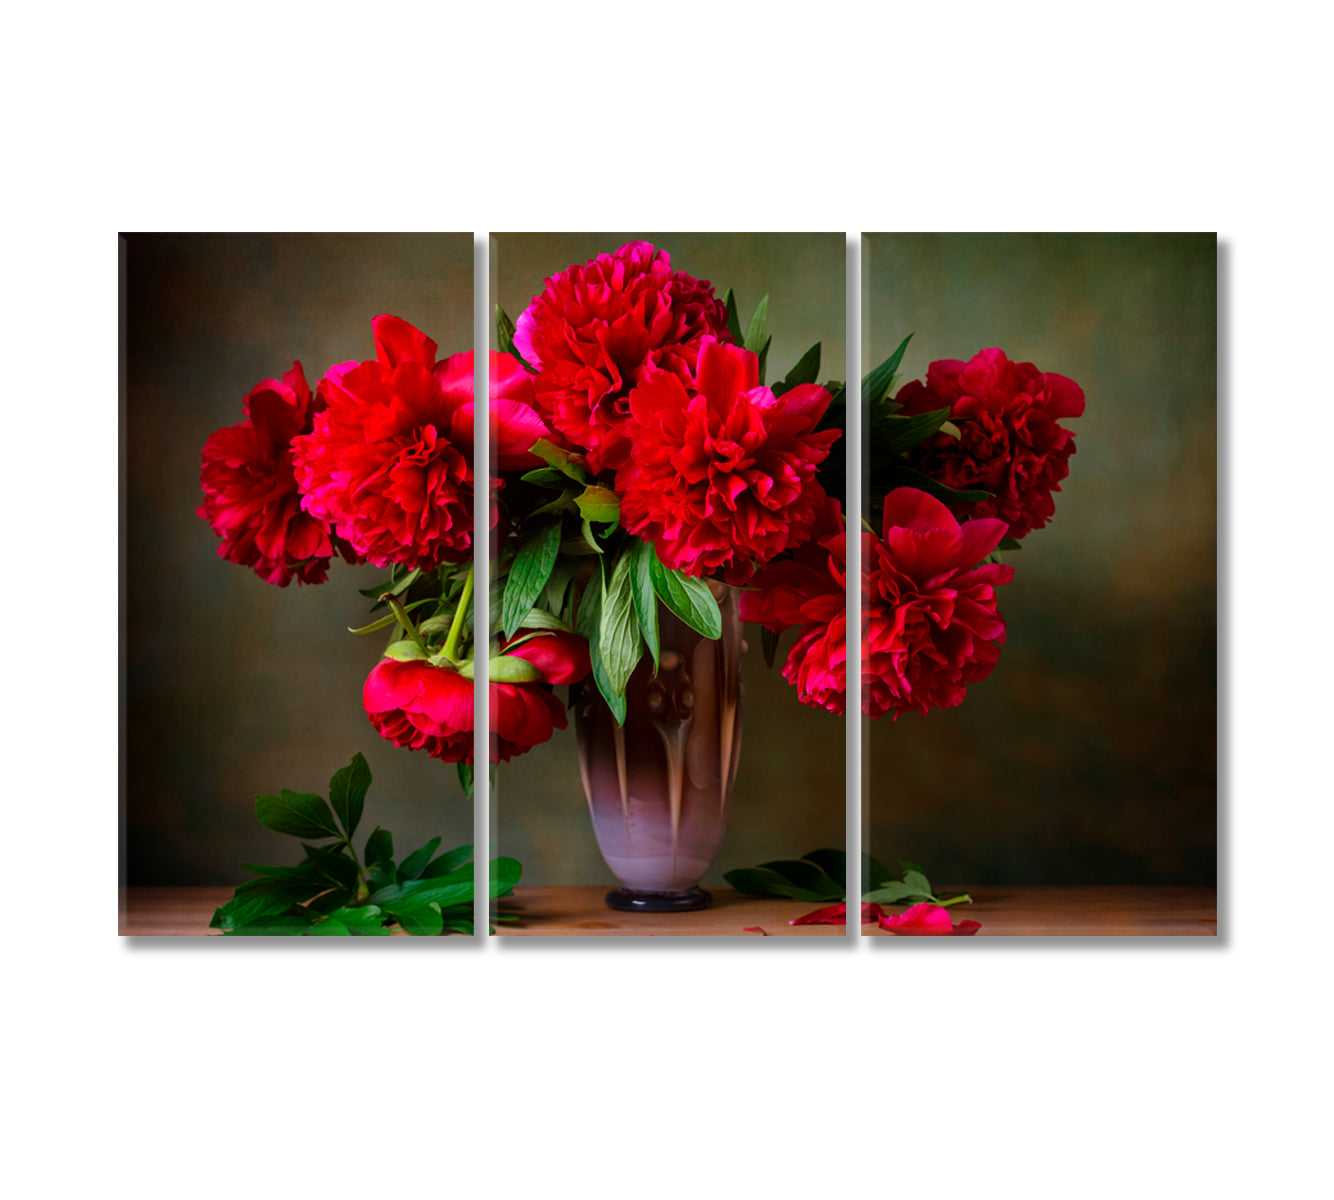 Still Life with Red Peonies Canvas Print-Canvas Print-CetArt-3 Panels-36x24 inches-CetArt